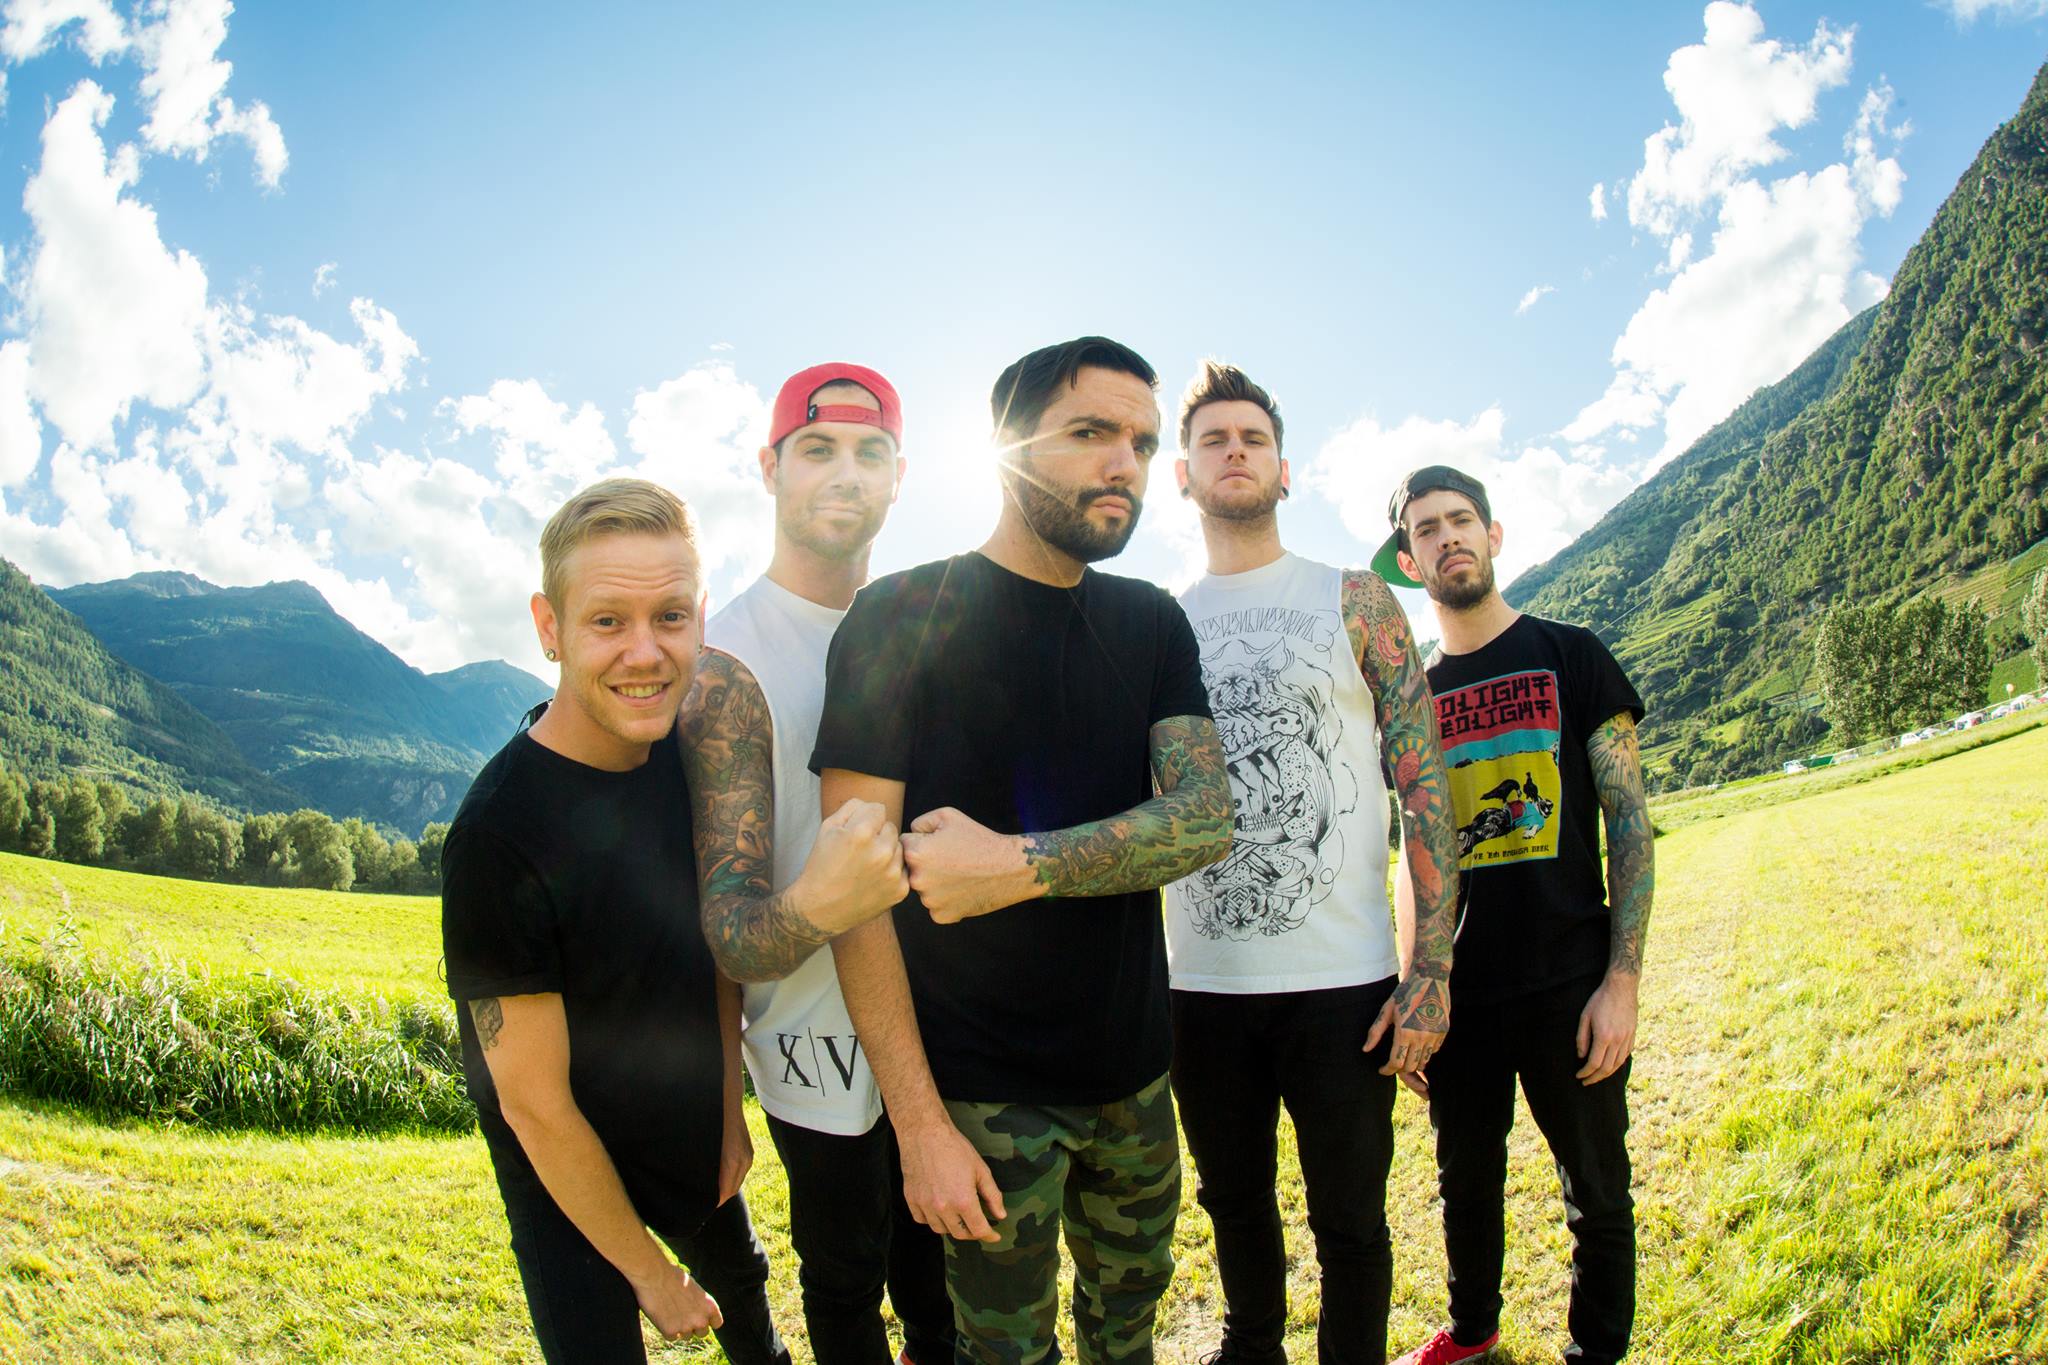 Victory Records issues statement on A Day To Remember case